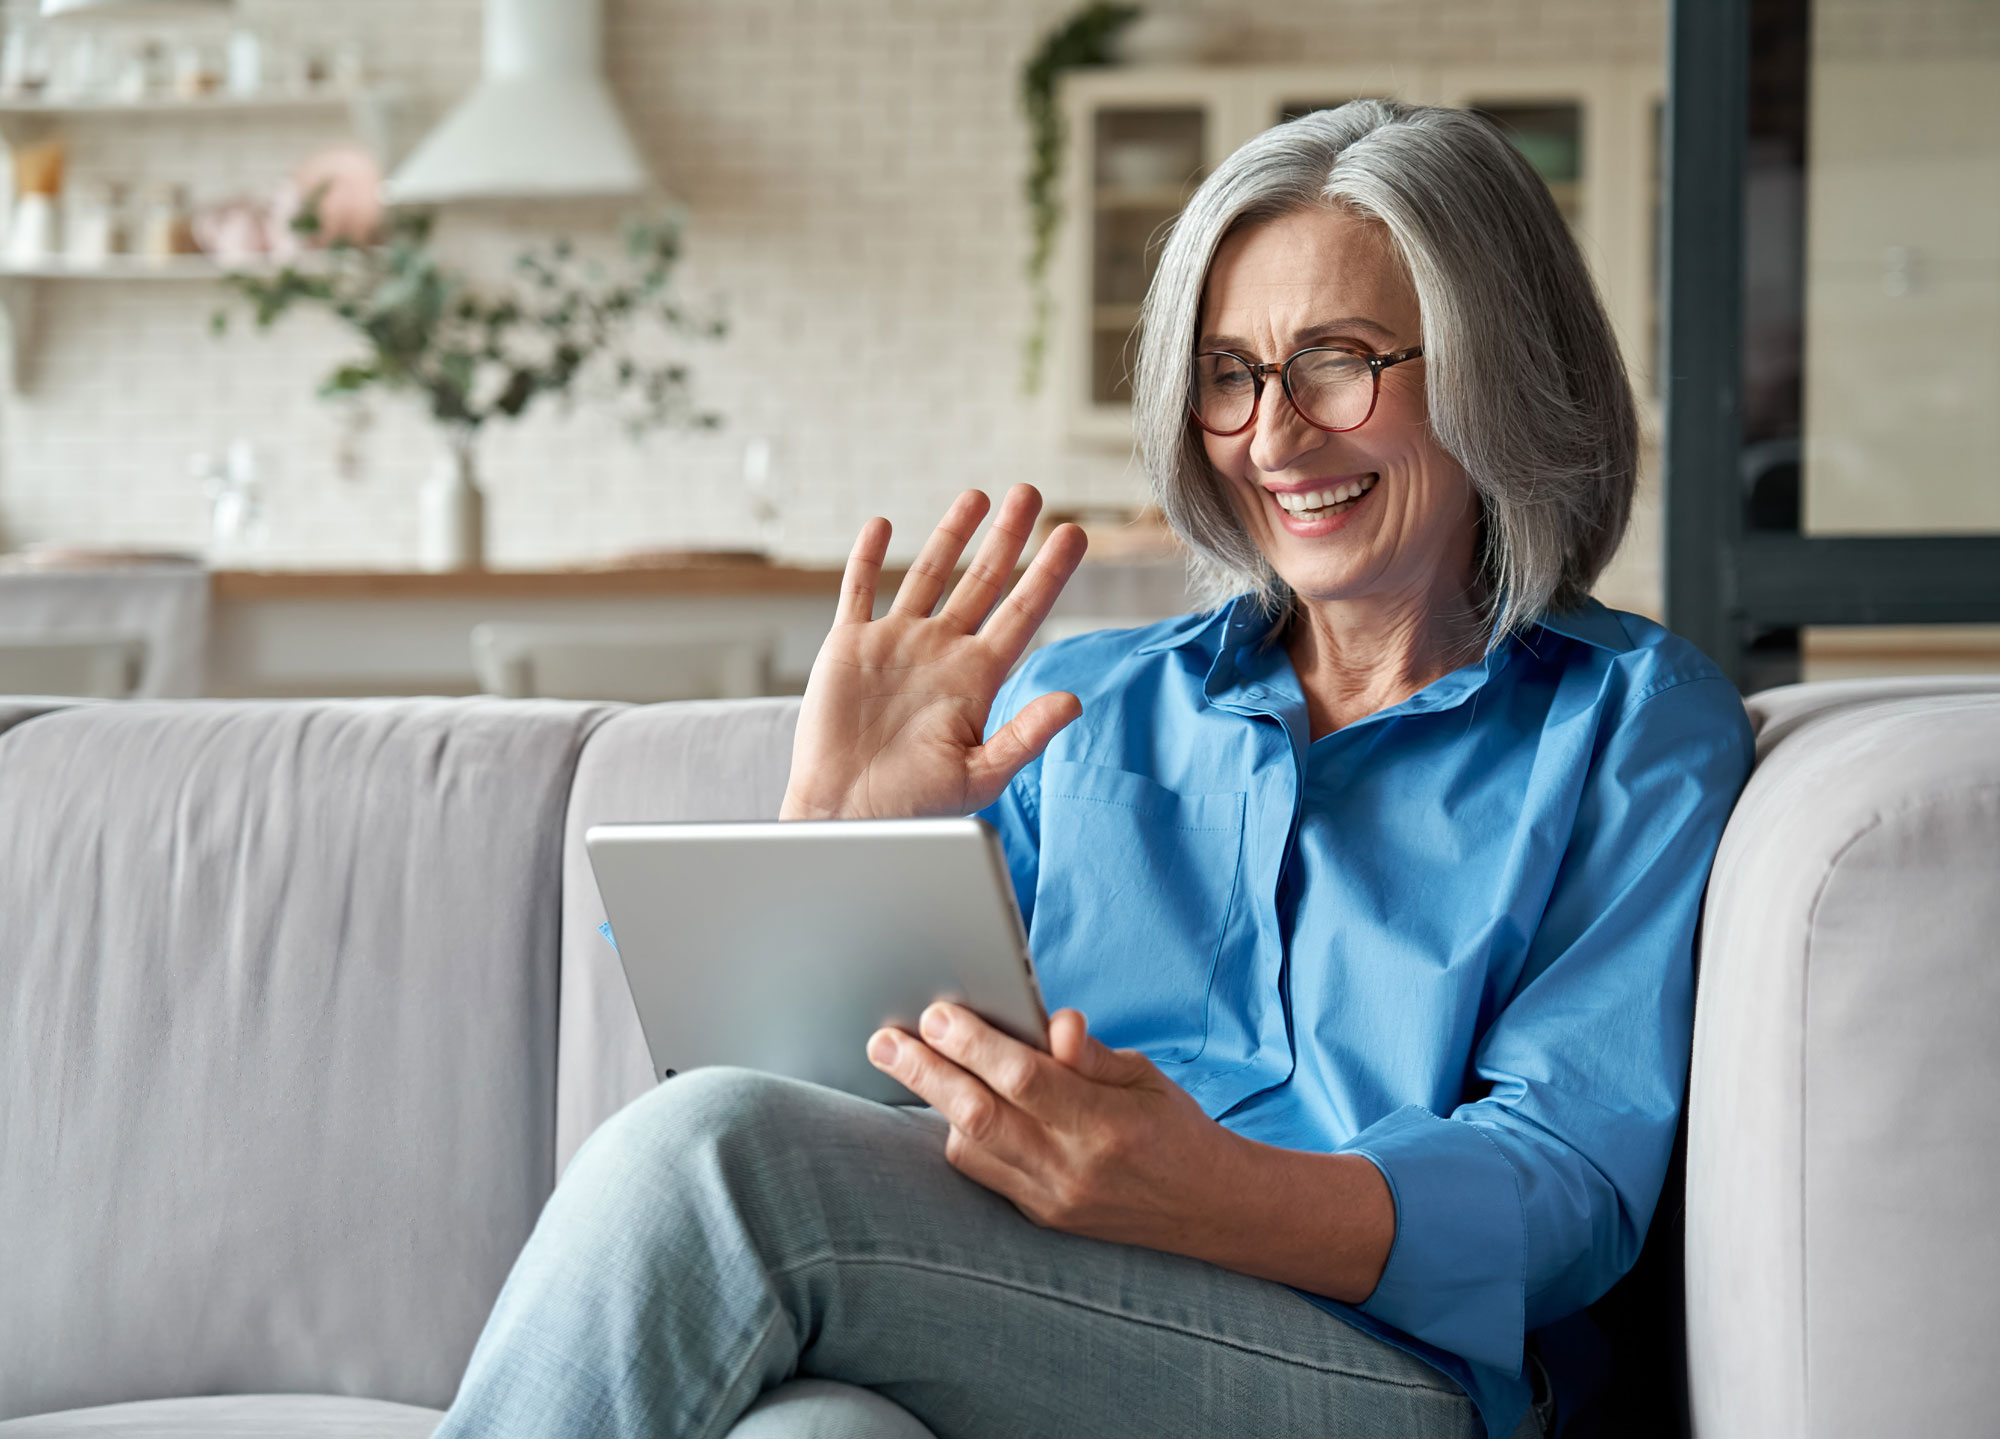 A senior woman laughs and waves while video chatting on a tablet.